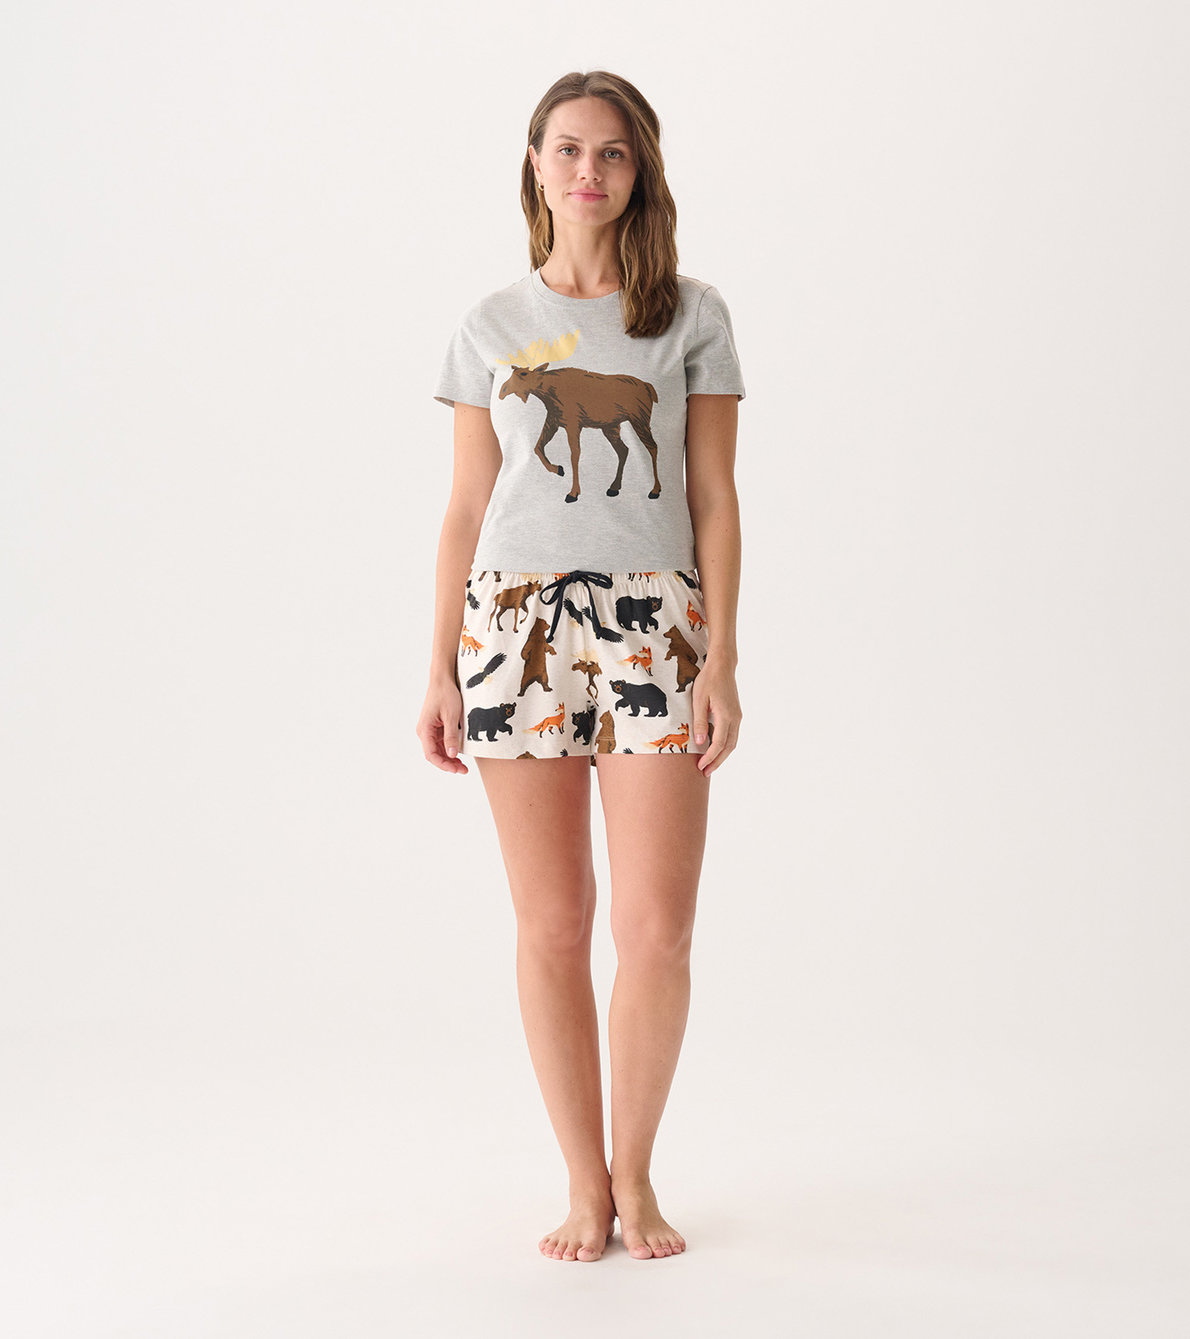 View larger image of Women's Wild Life T-Shirt and Shorts Pajama Separates